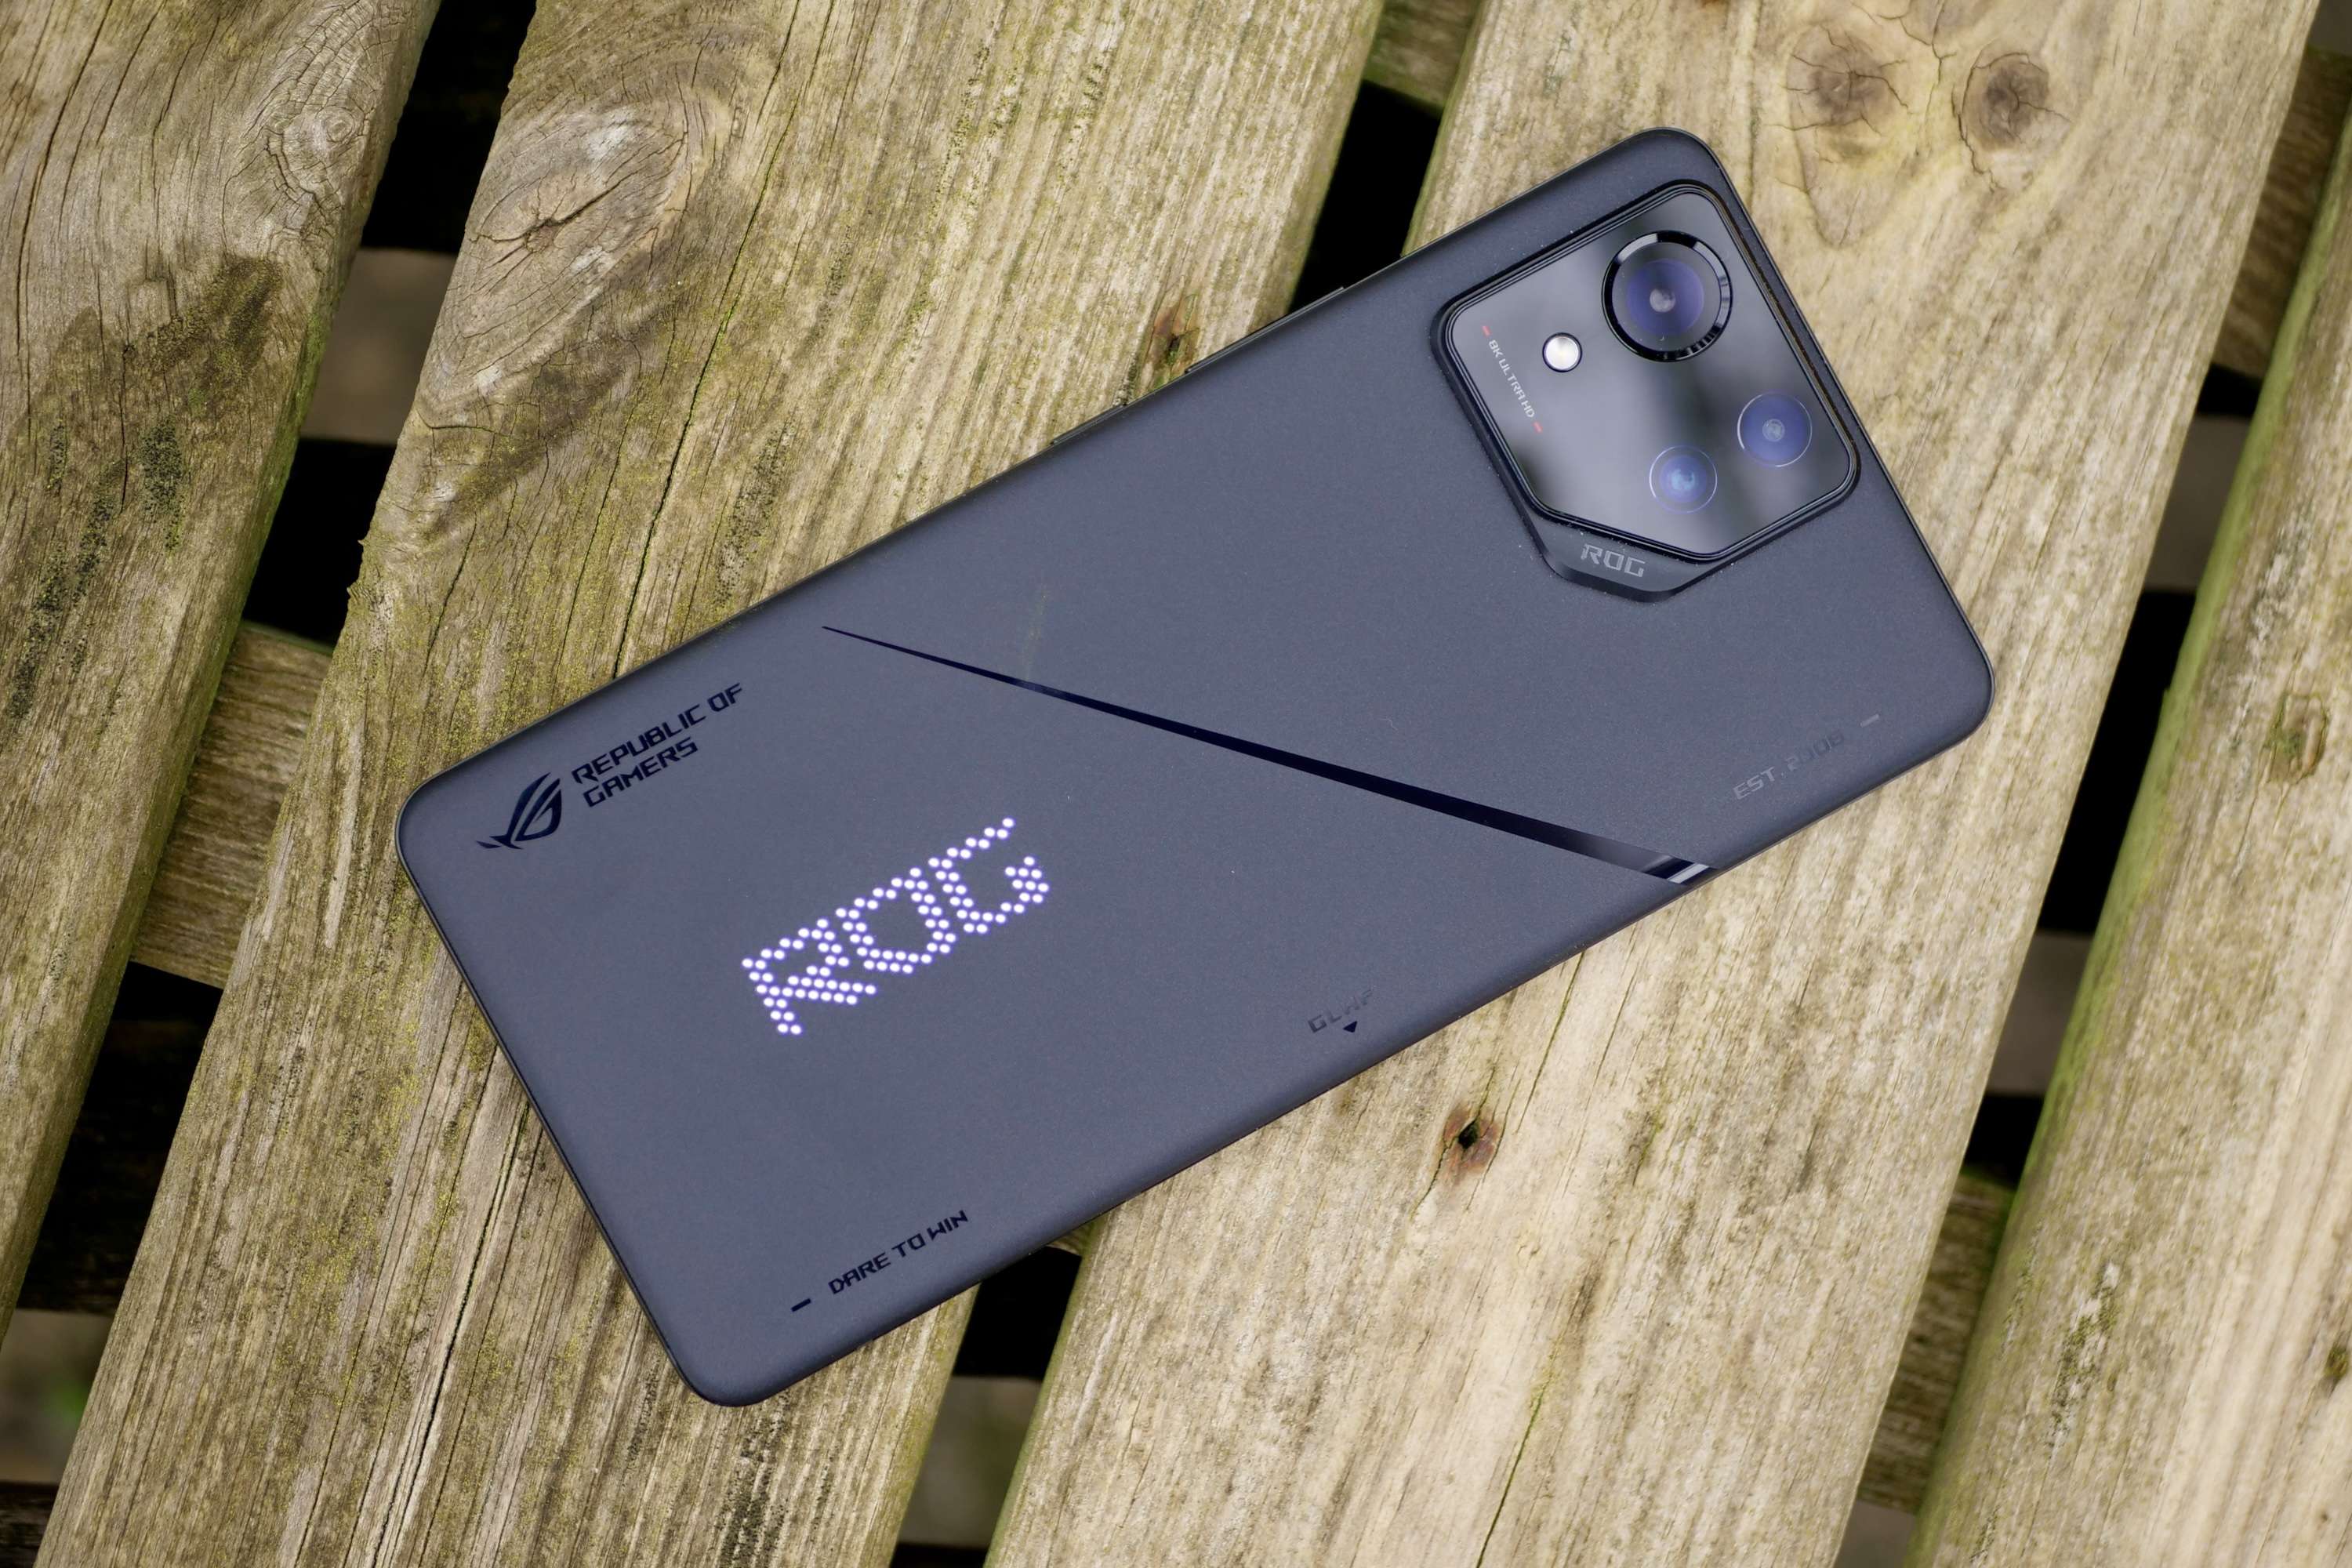 ASUS ROG Phone 8 Pro is Gaming Killer ! All Specs, Price, Review